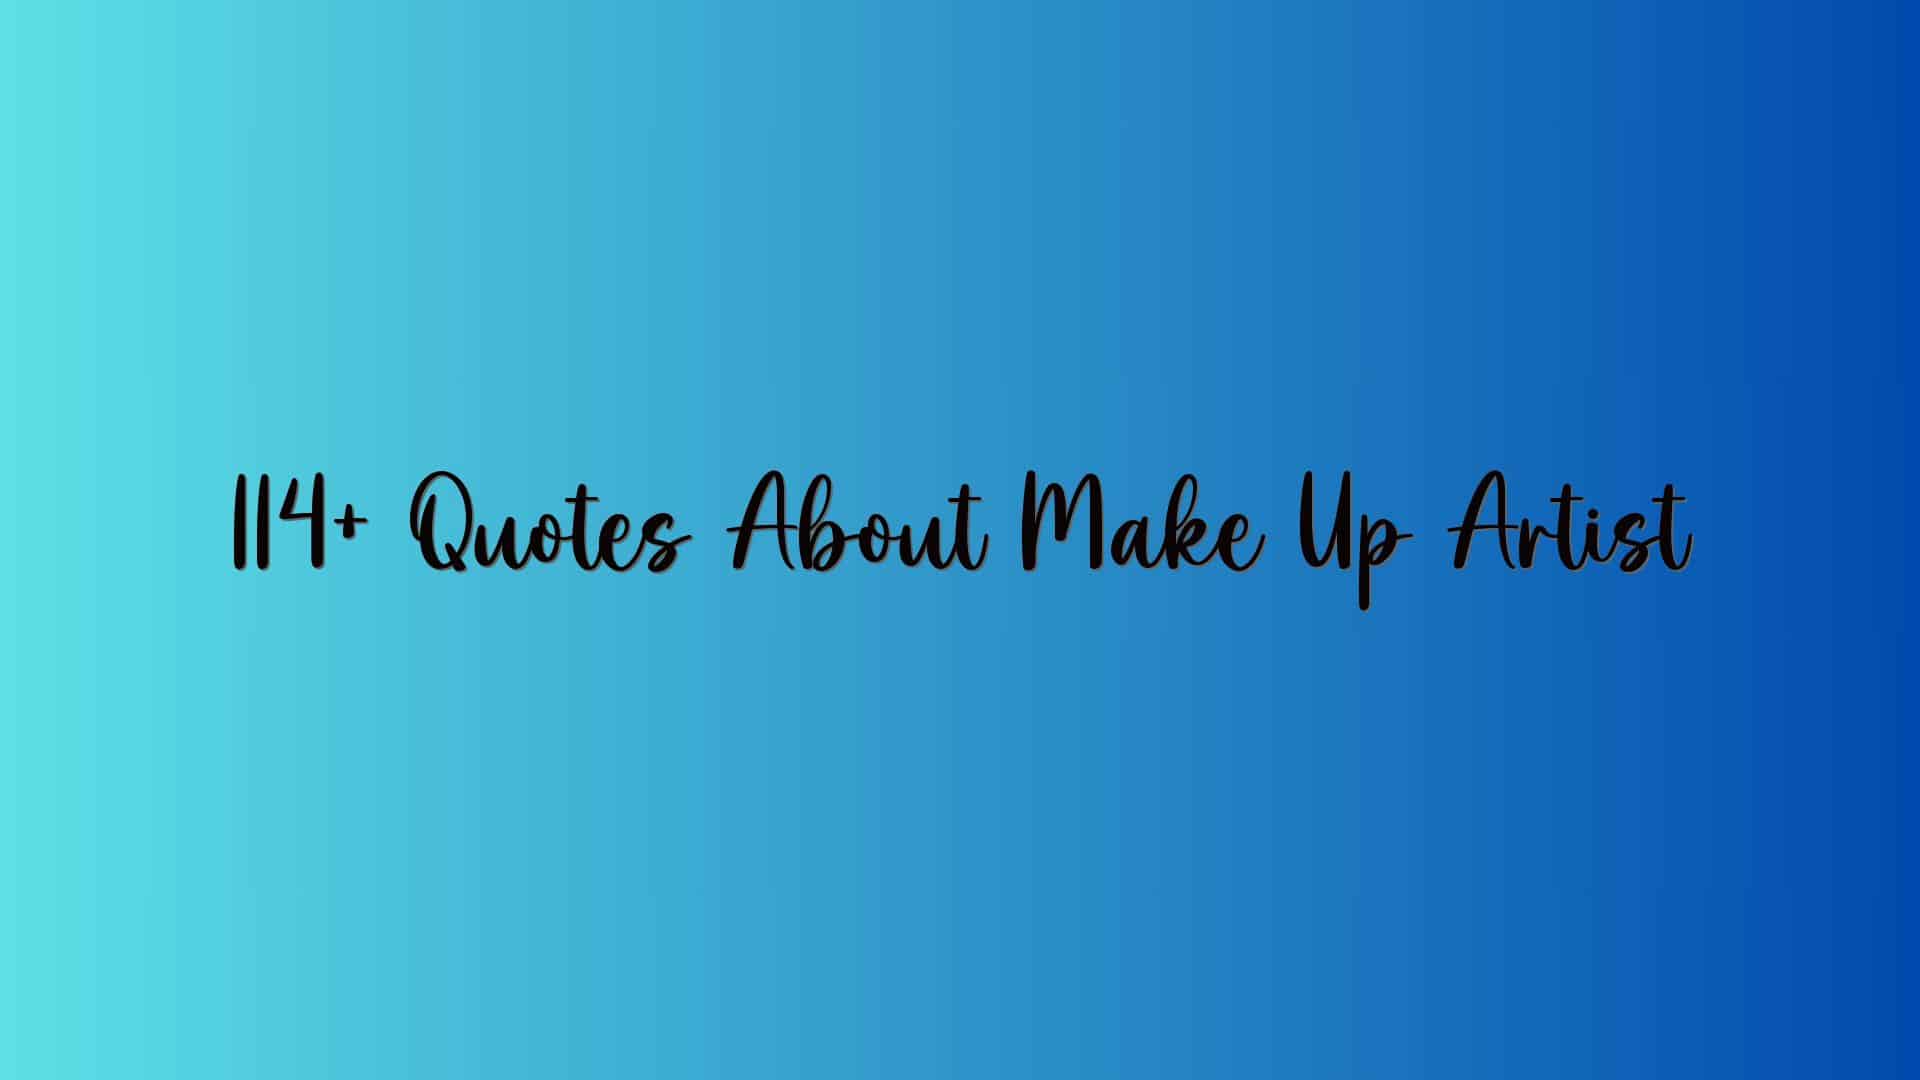 114+ Quotes About Make Up Artist